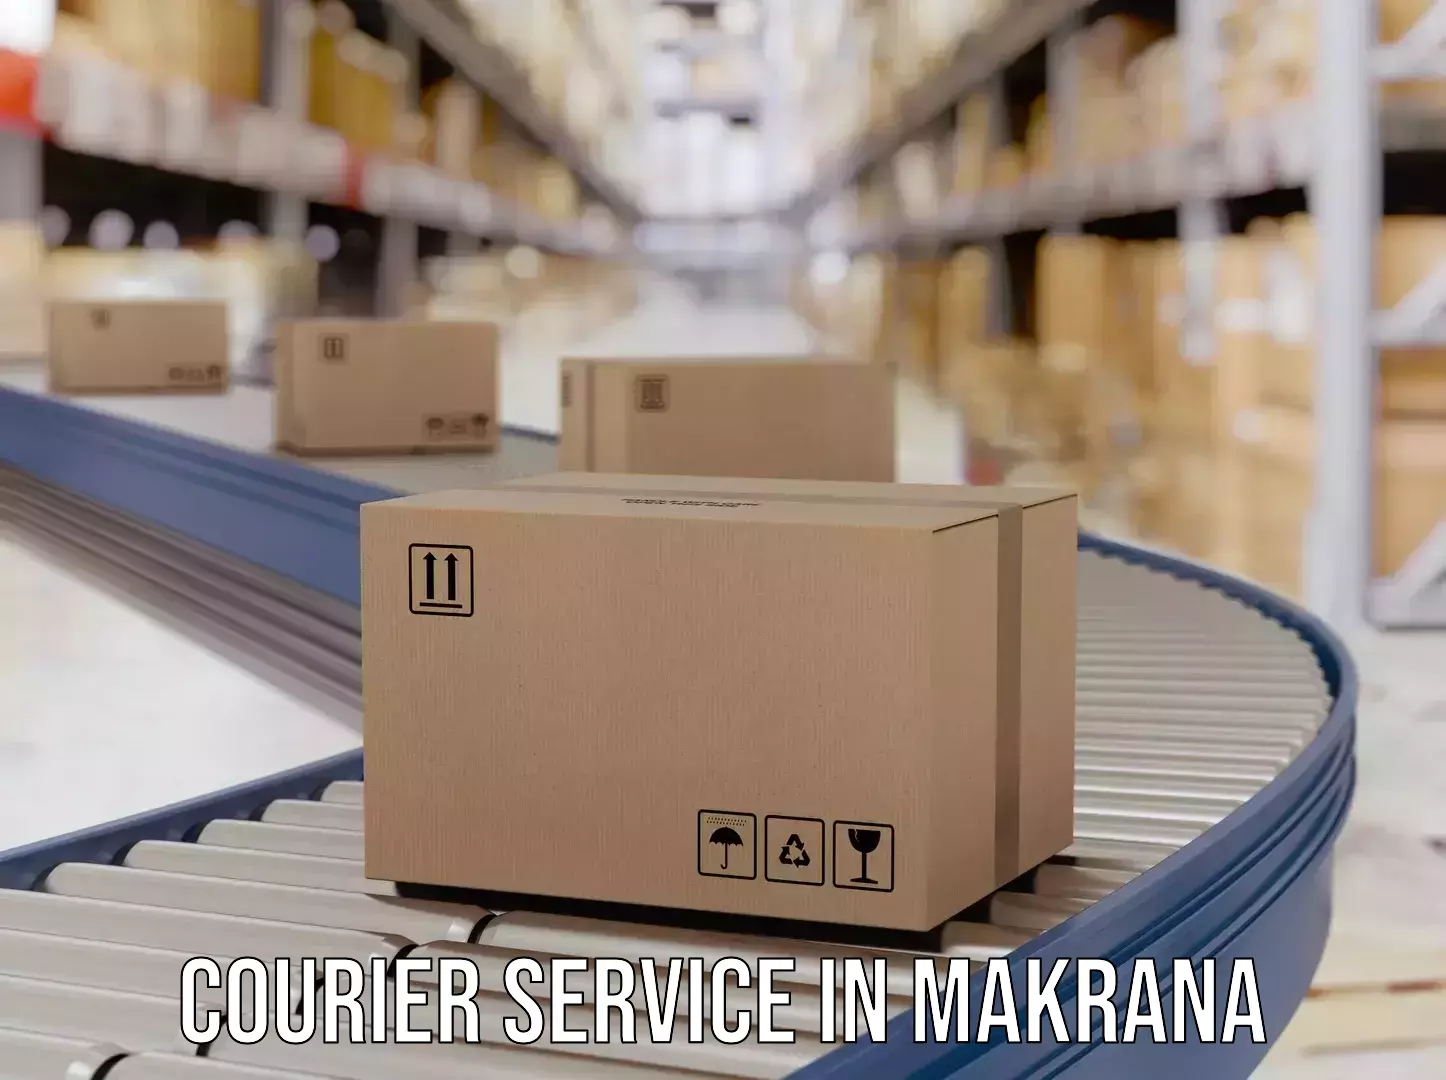 Enhanced delivery experience in Makrana